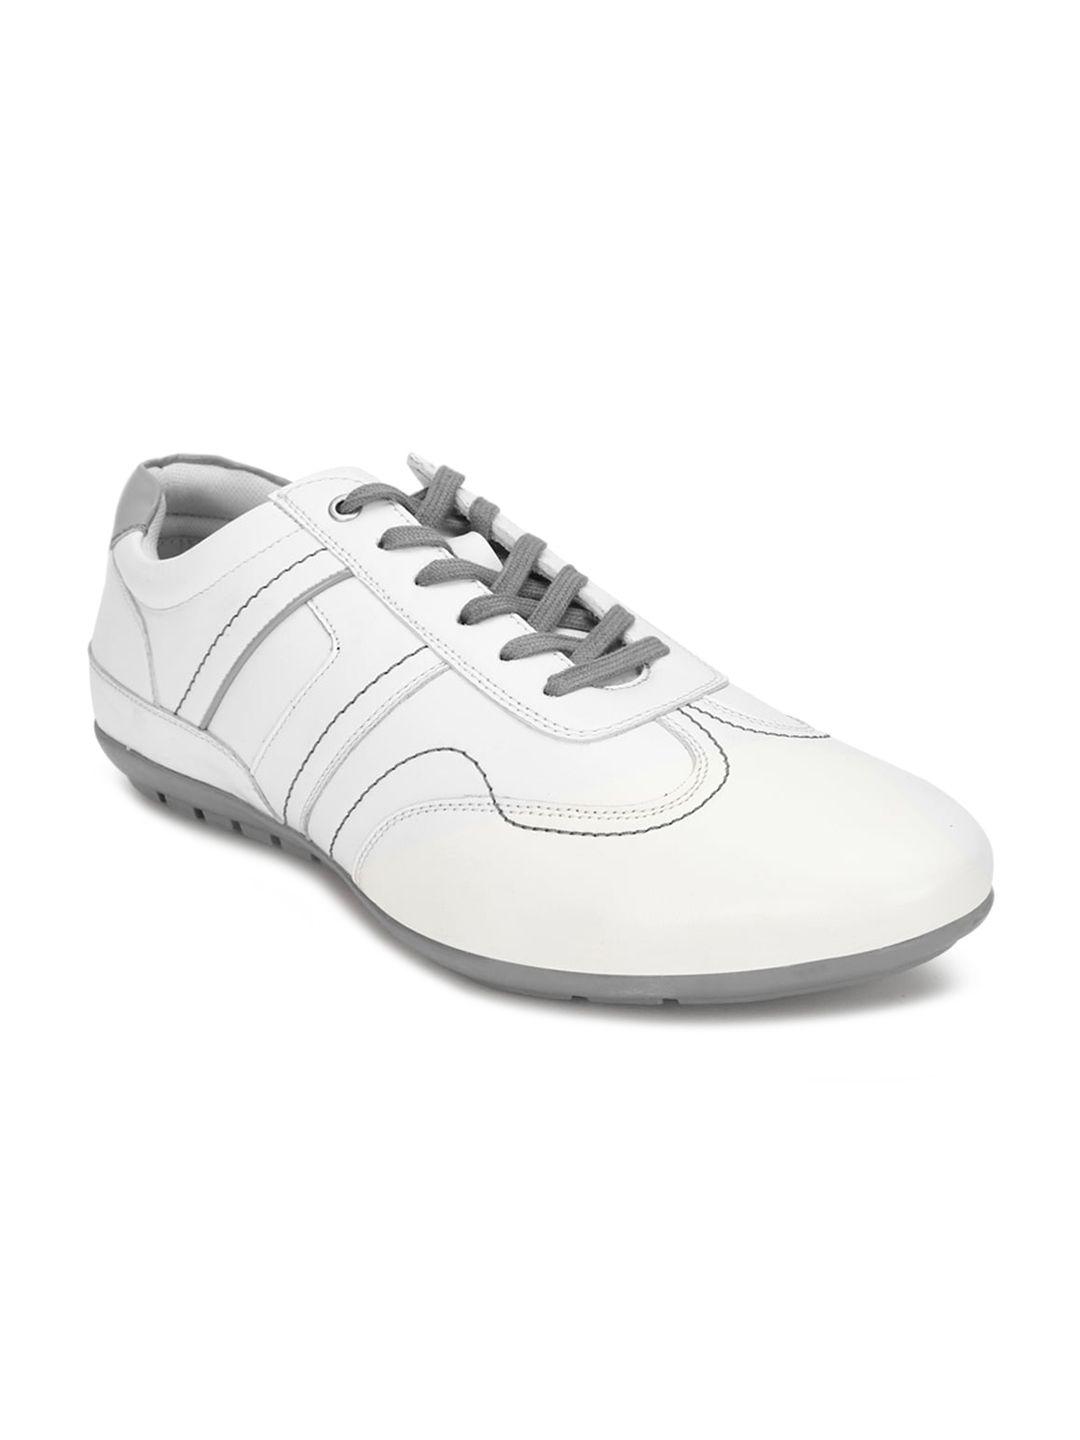 forever-21-men-white-&-grey-pu-sneakers